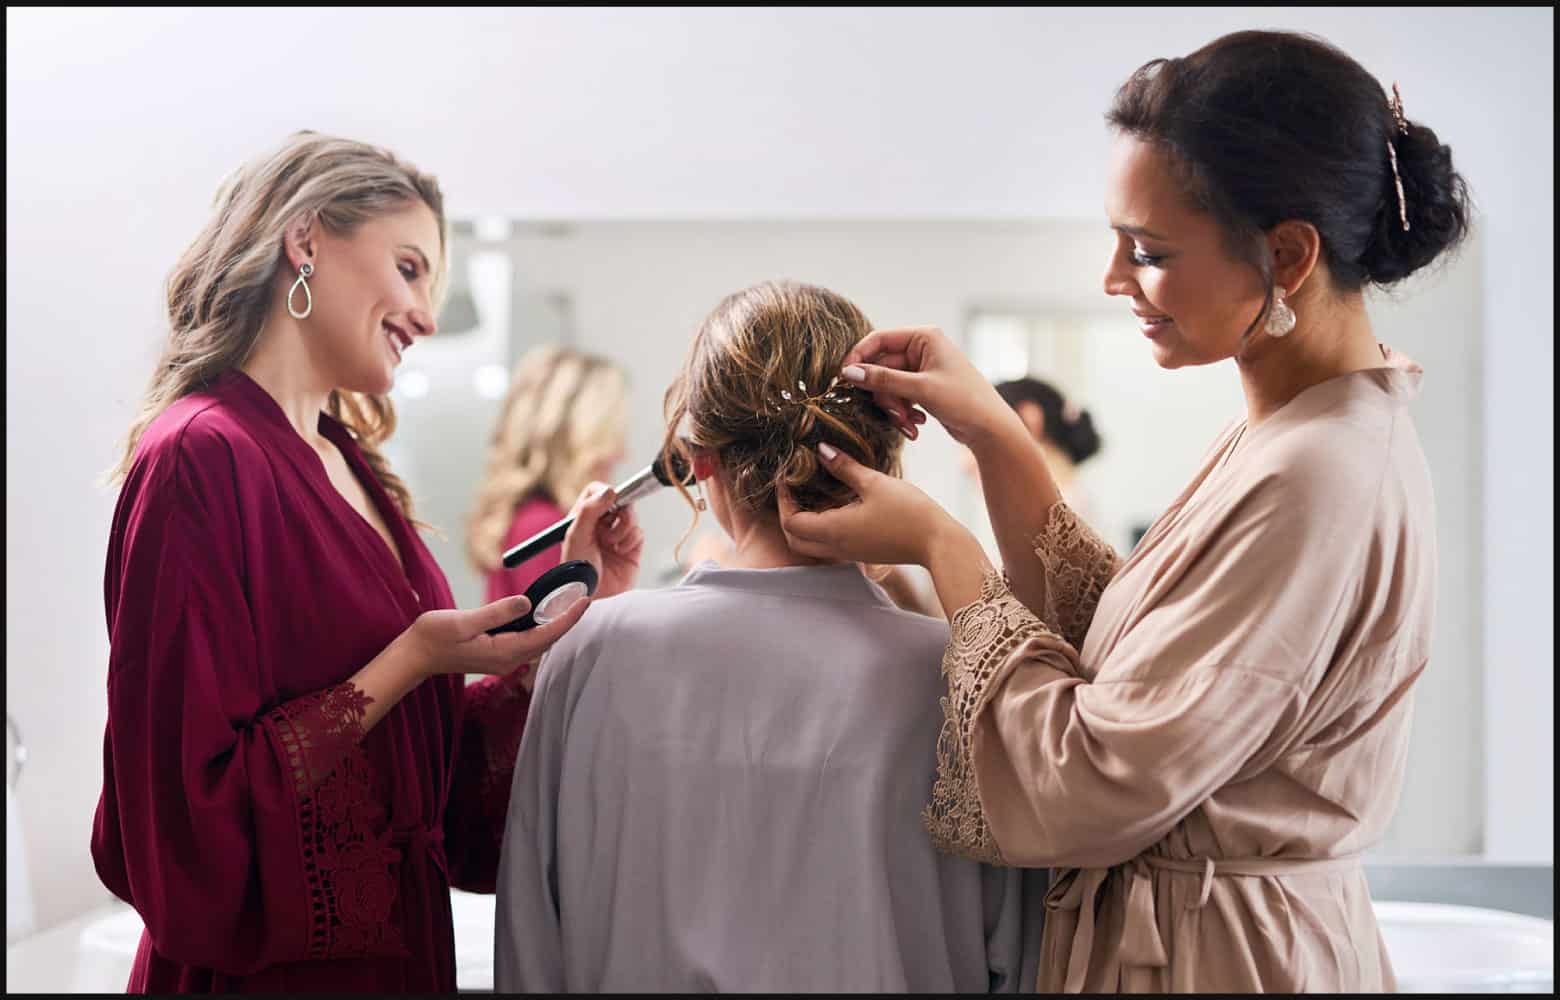 Back view of makeup artist wearing a magenta robe and hair stylist wearing a beige robe working on client